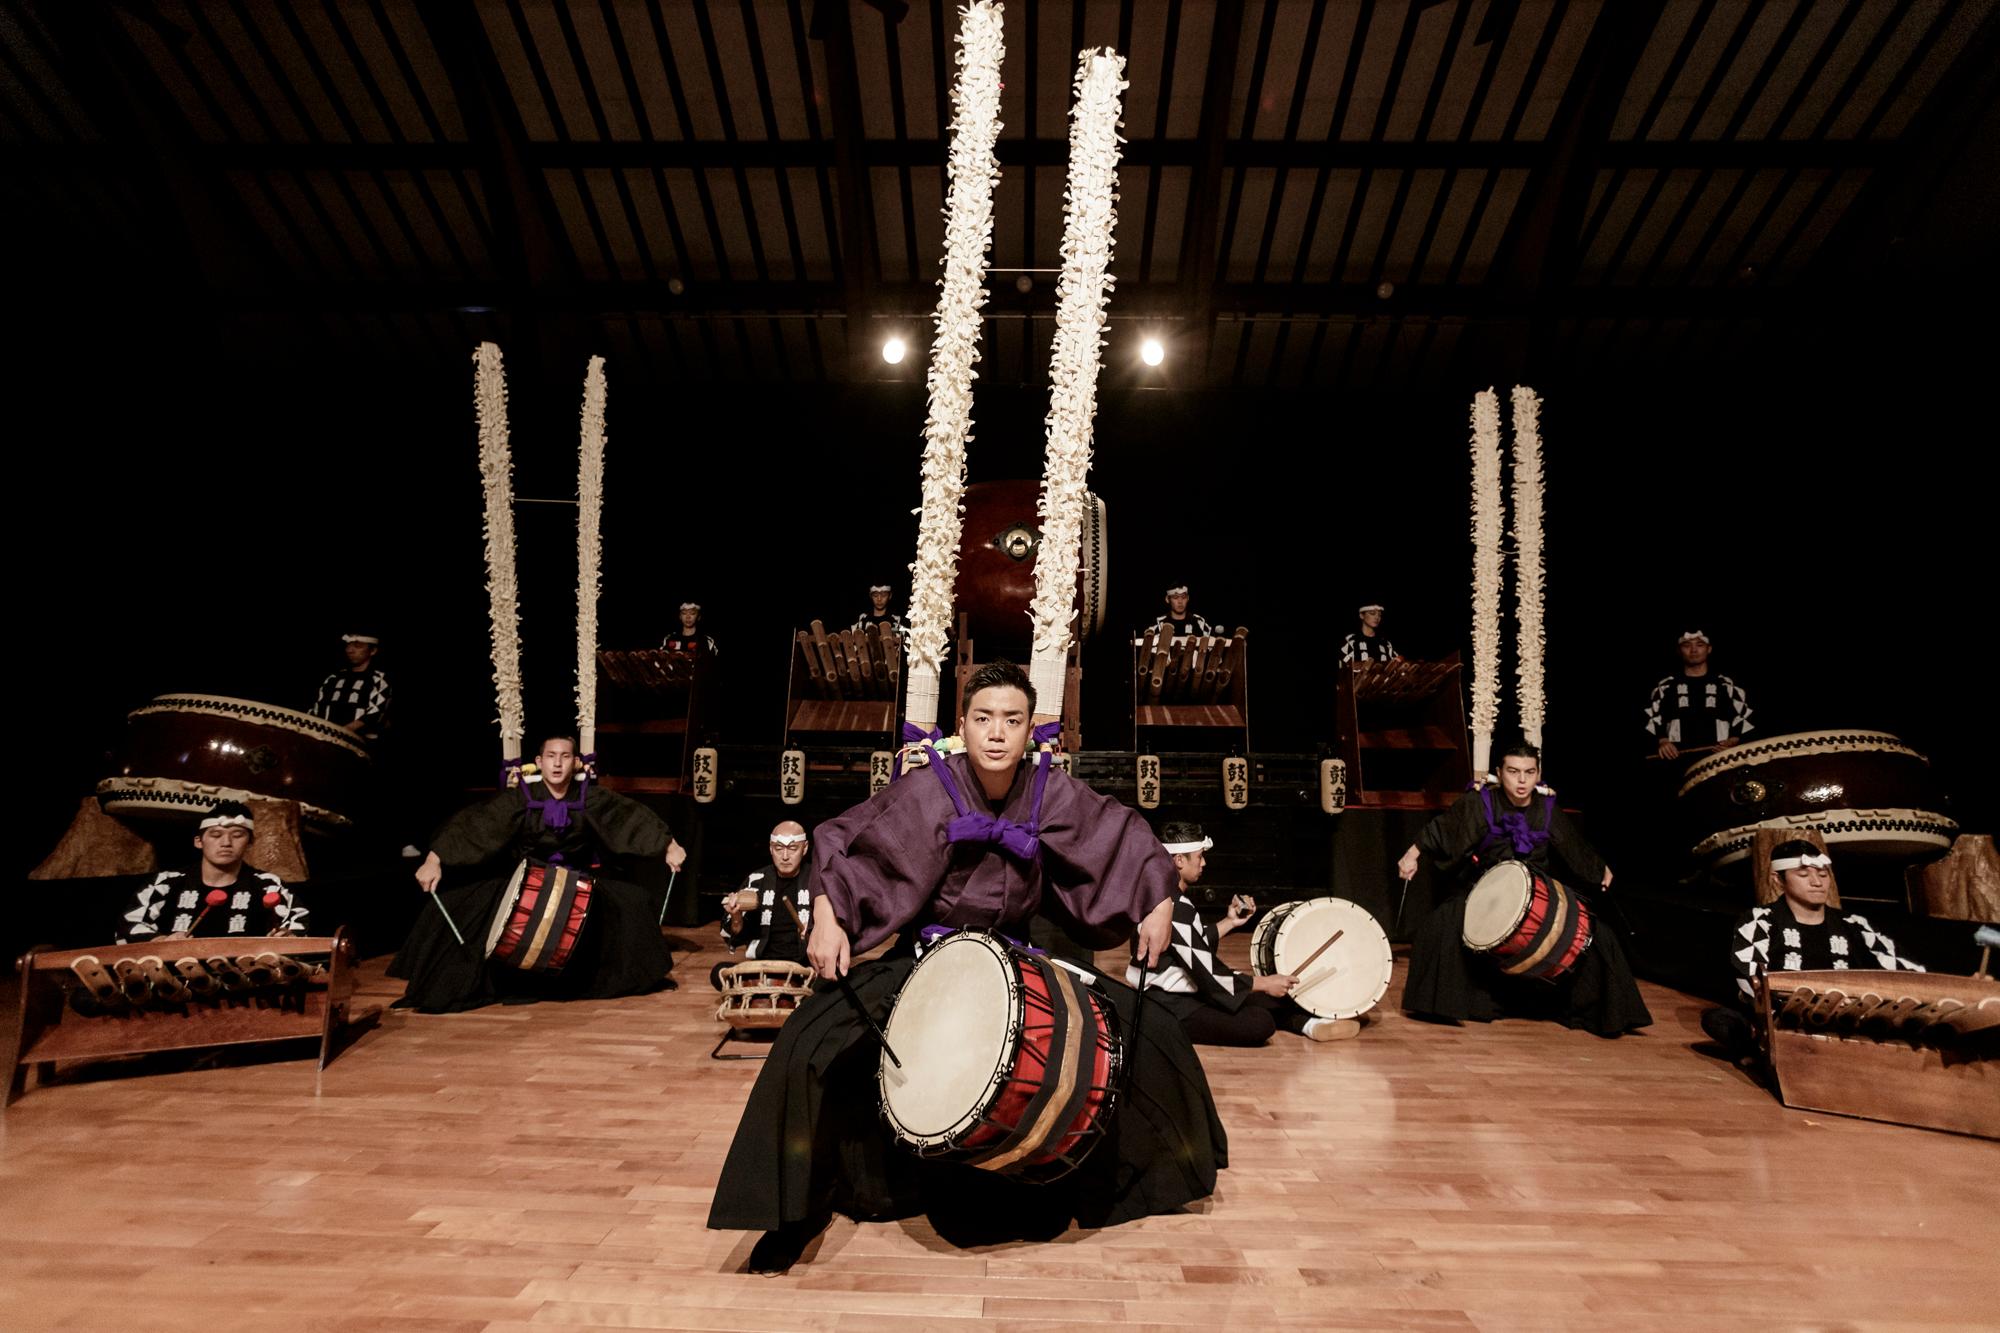 The Leisure and Cultural Services Department has invited Kodo, Japan's taiko drumming ensemble, to Hong Kong to present "Warabe" in September. Photo shows "Warabe" by Kodo. (Source of photo: Takashi Okamoto)